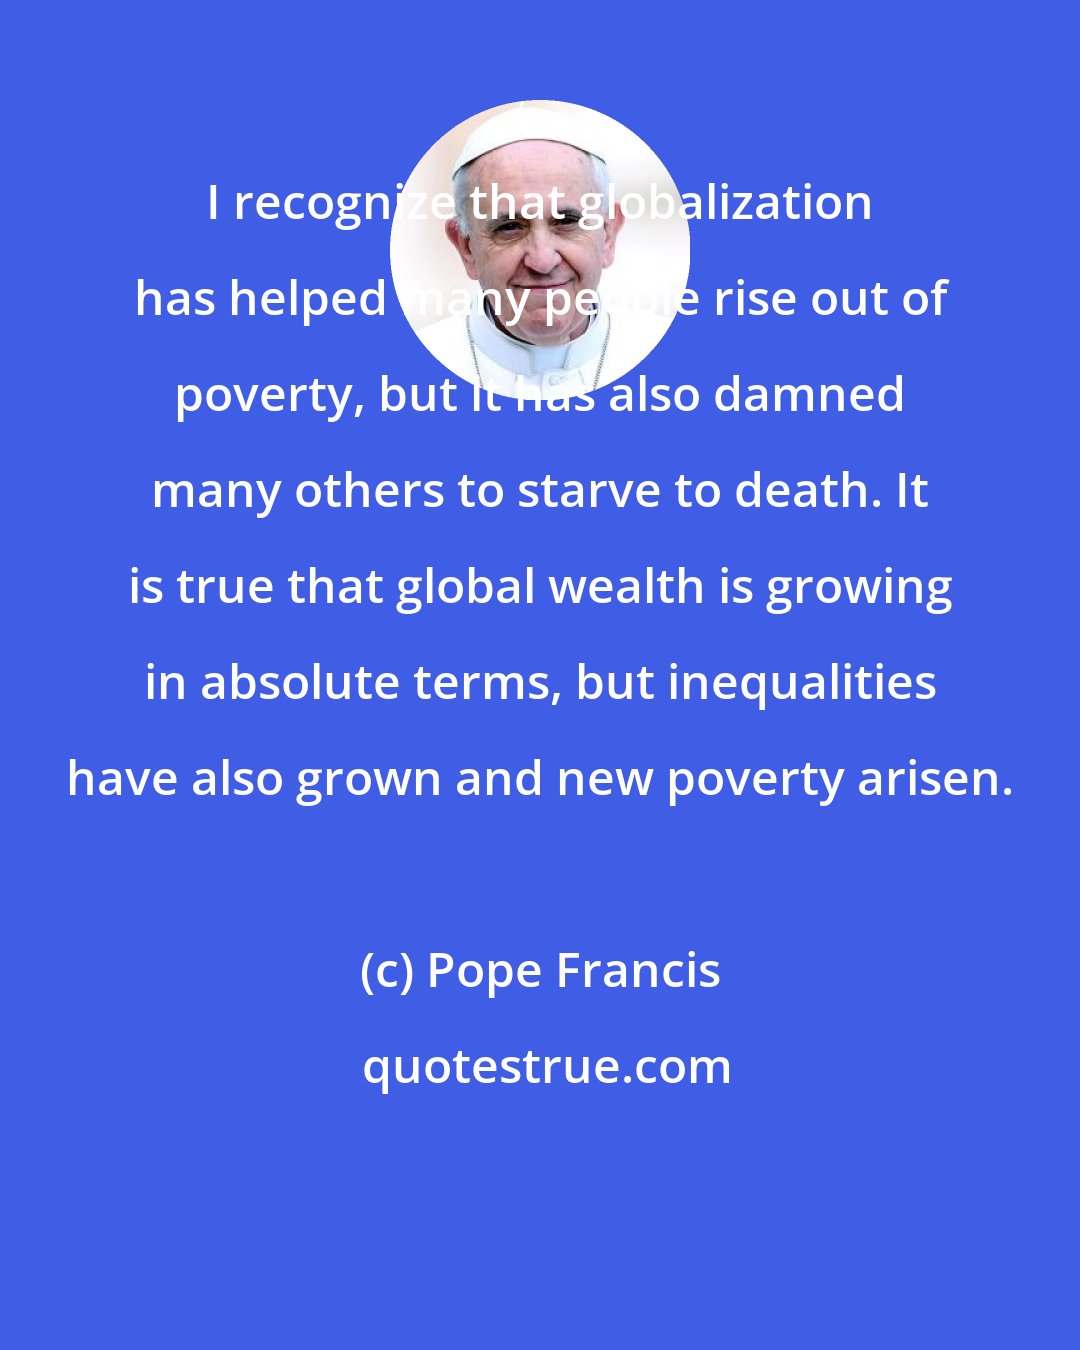 Pope Francis: I recognize that globalization has helped many people rise out of poverty, but it has also damned many others to starve to death. It is true that global wealth is growing in absolute terms, but inequalities have also grown and new poverty arisen.